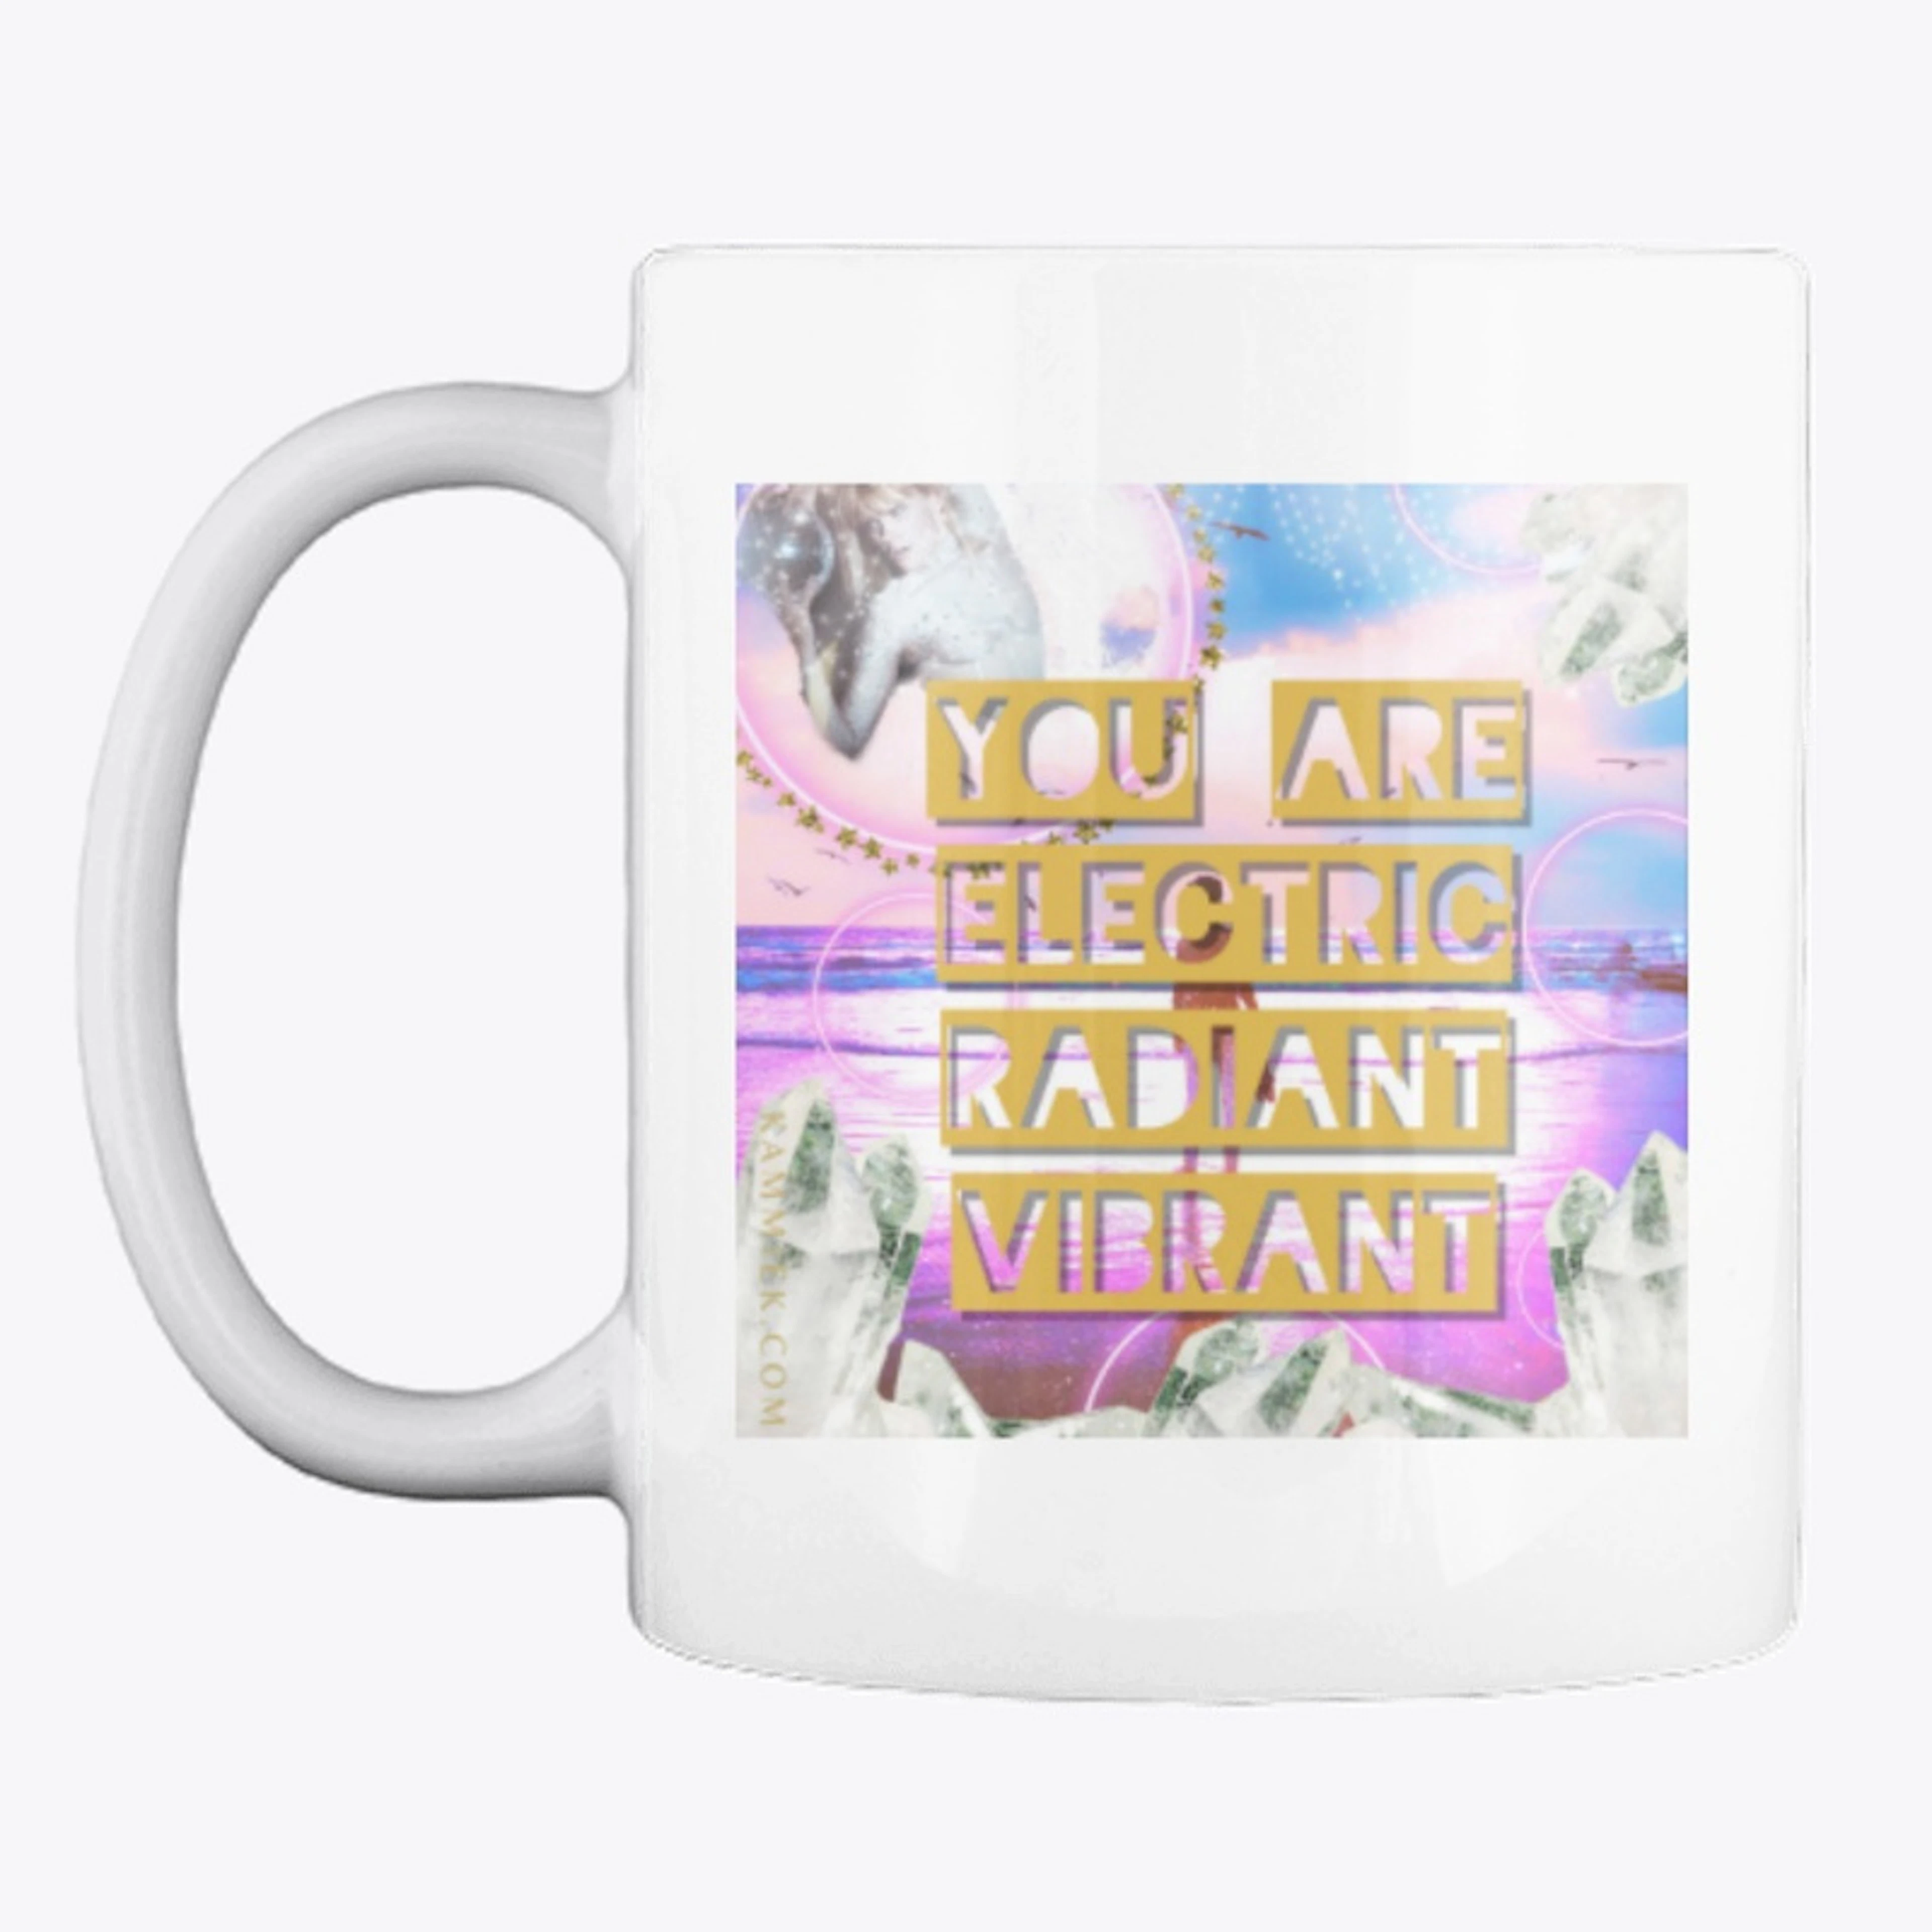 You are Electric Radiant Vibrant